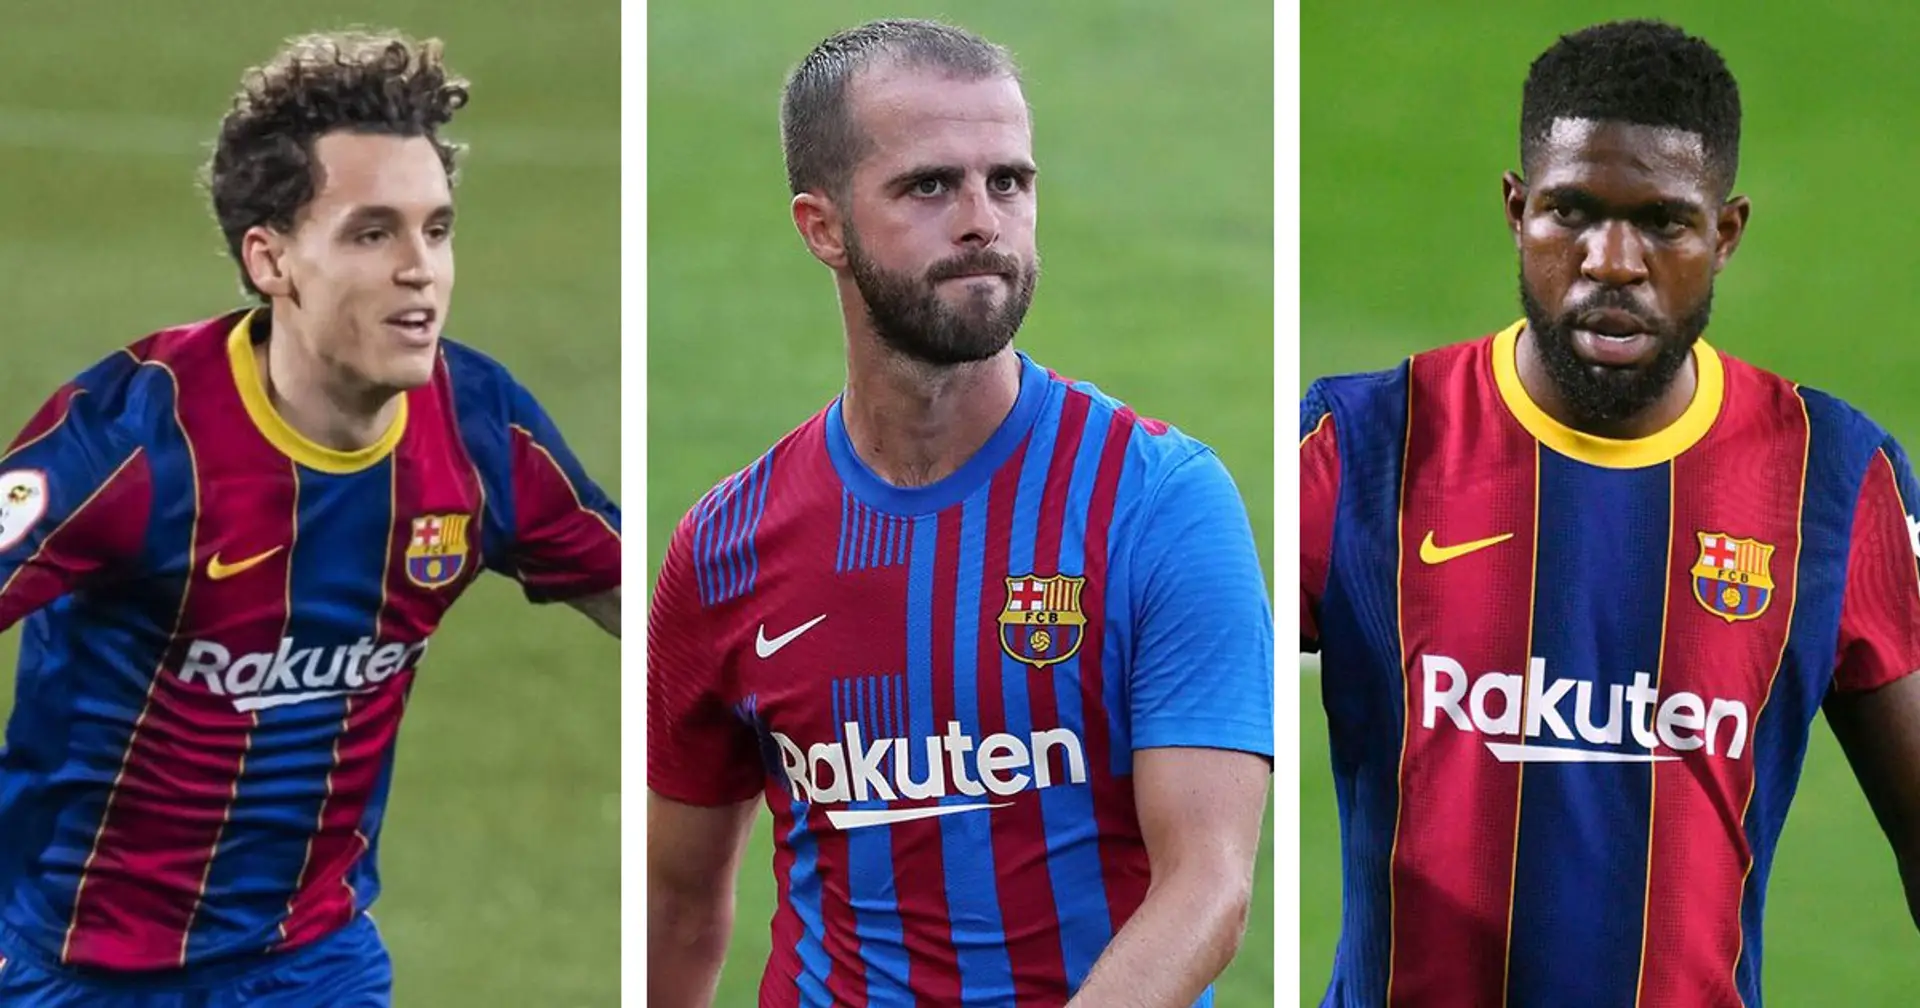 Director of football all but confirms Pjanic and Umtiti are on the market & 3 more under-radar stories at Barca